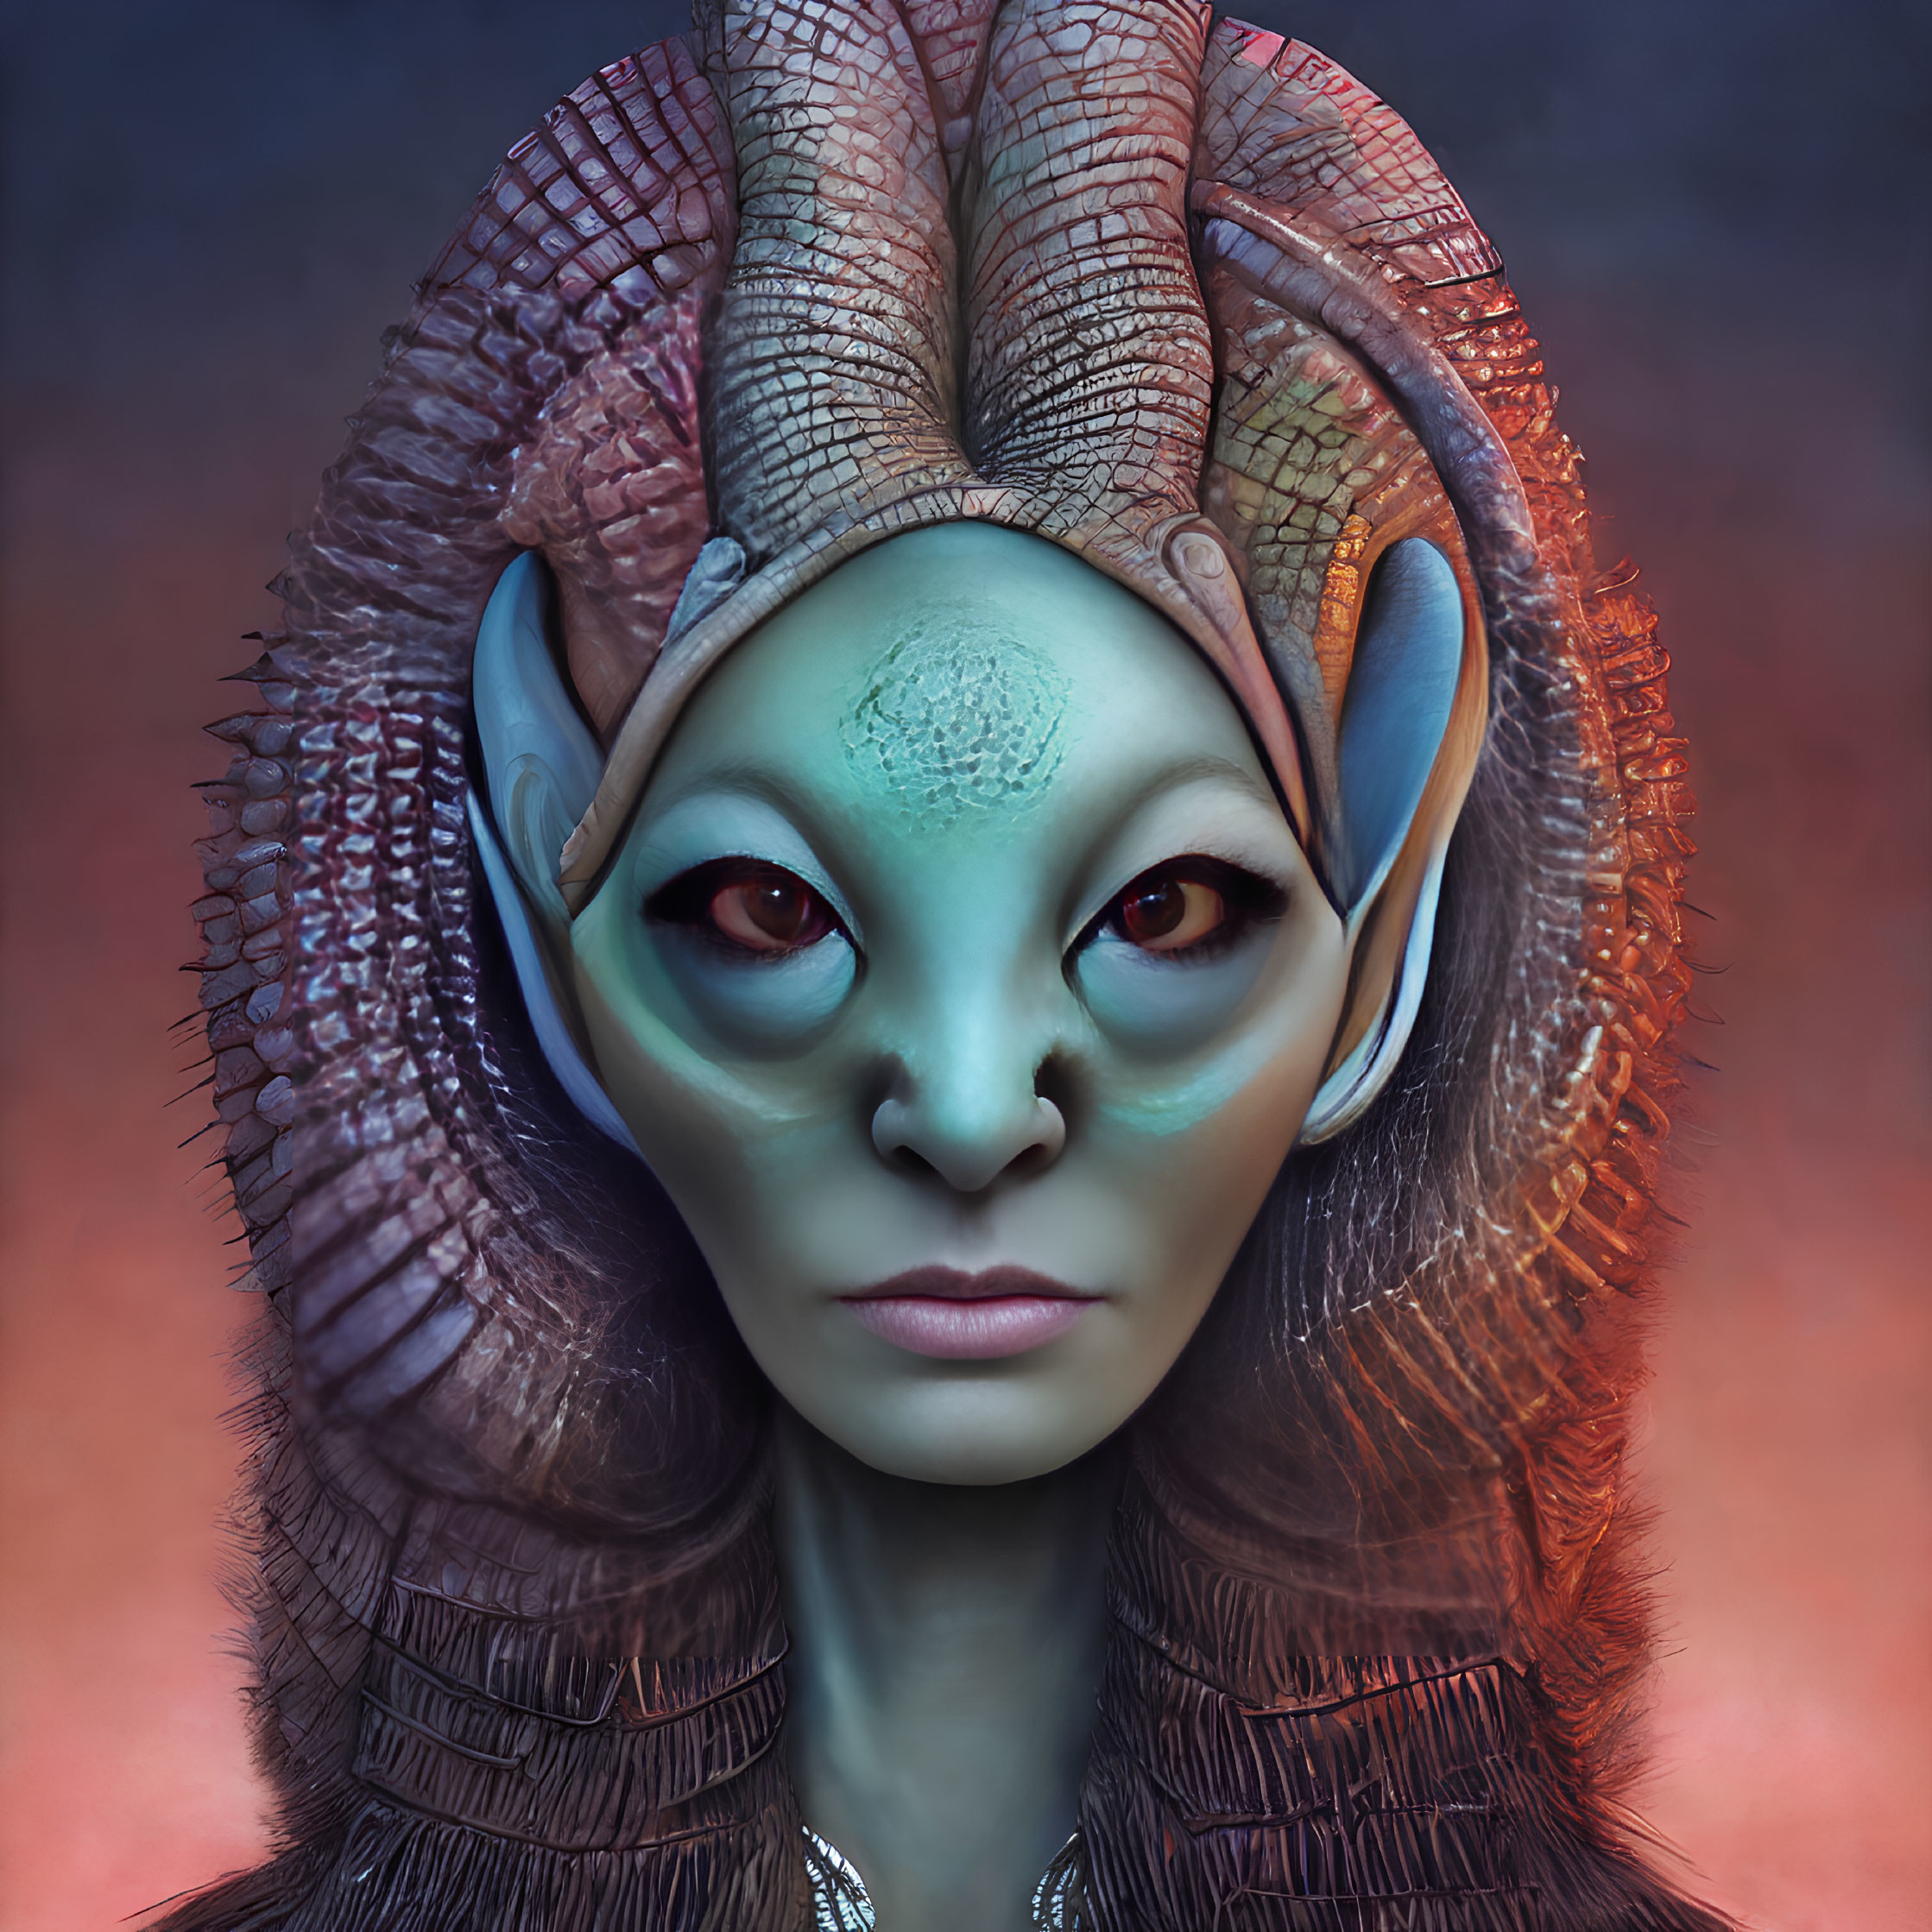 Alien portrait with almond-shaped eyes, crest headpiece, textured skin in blue and red hues